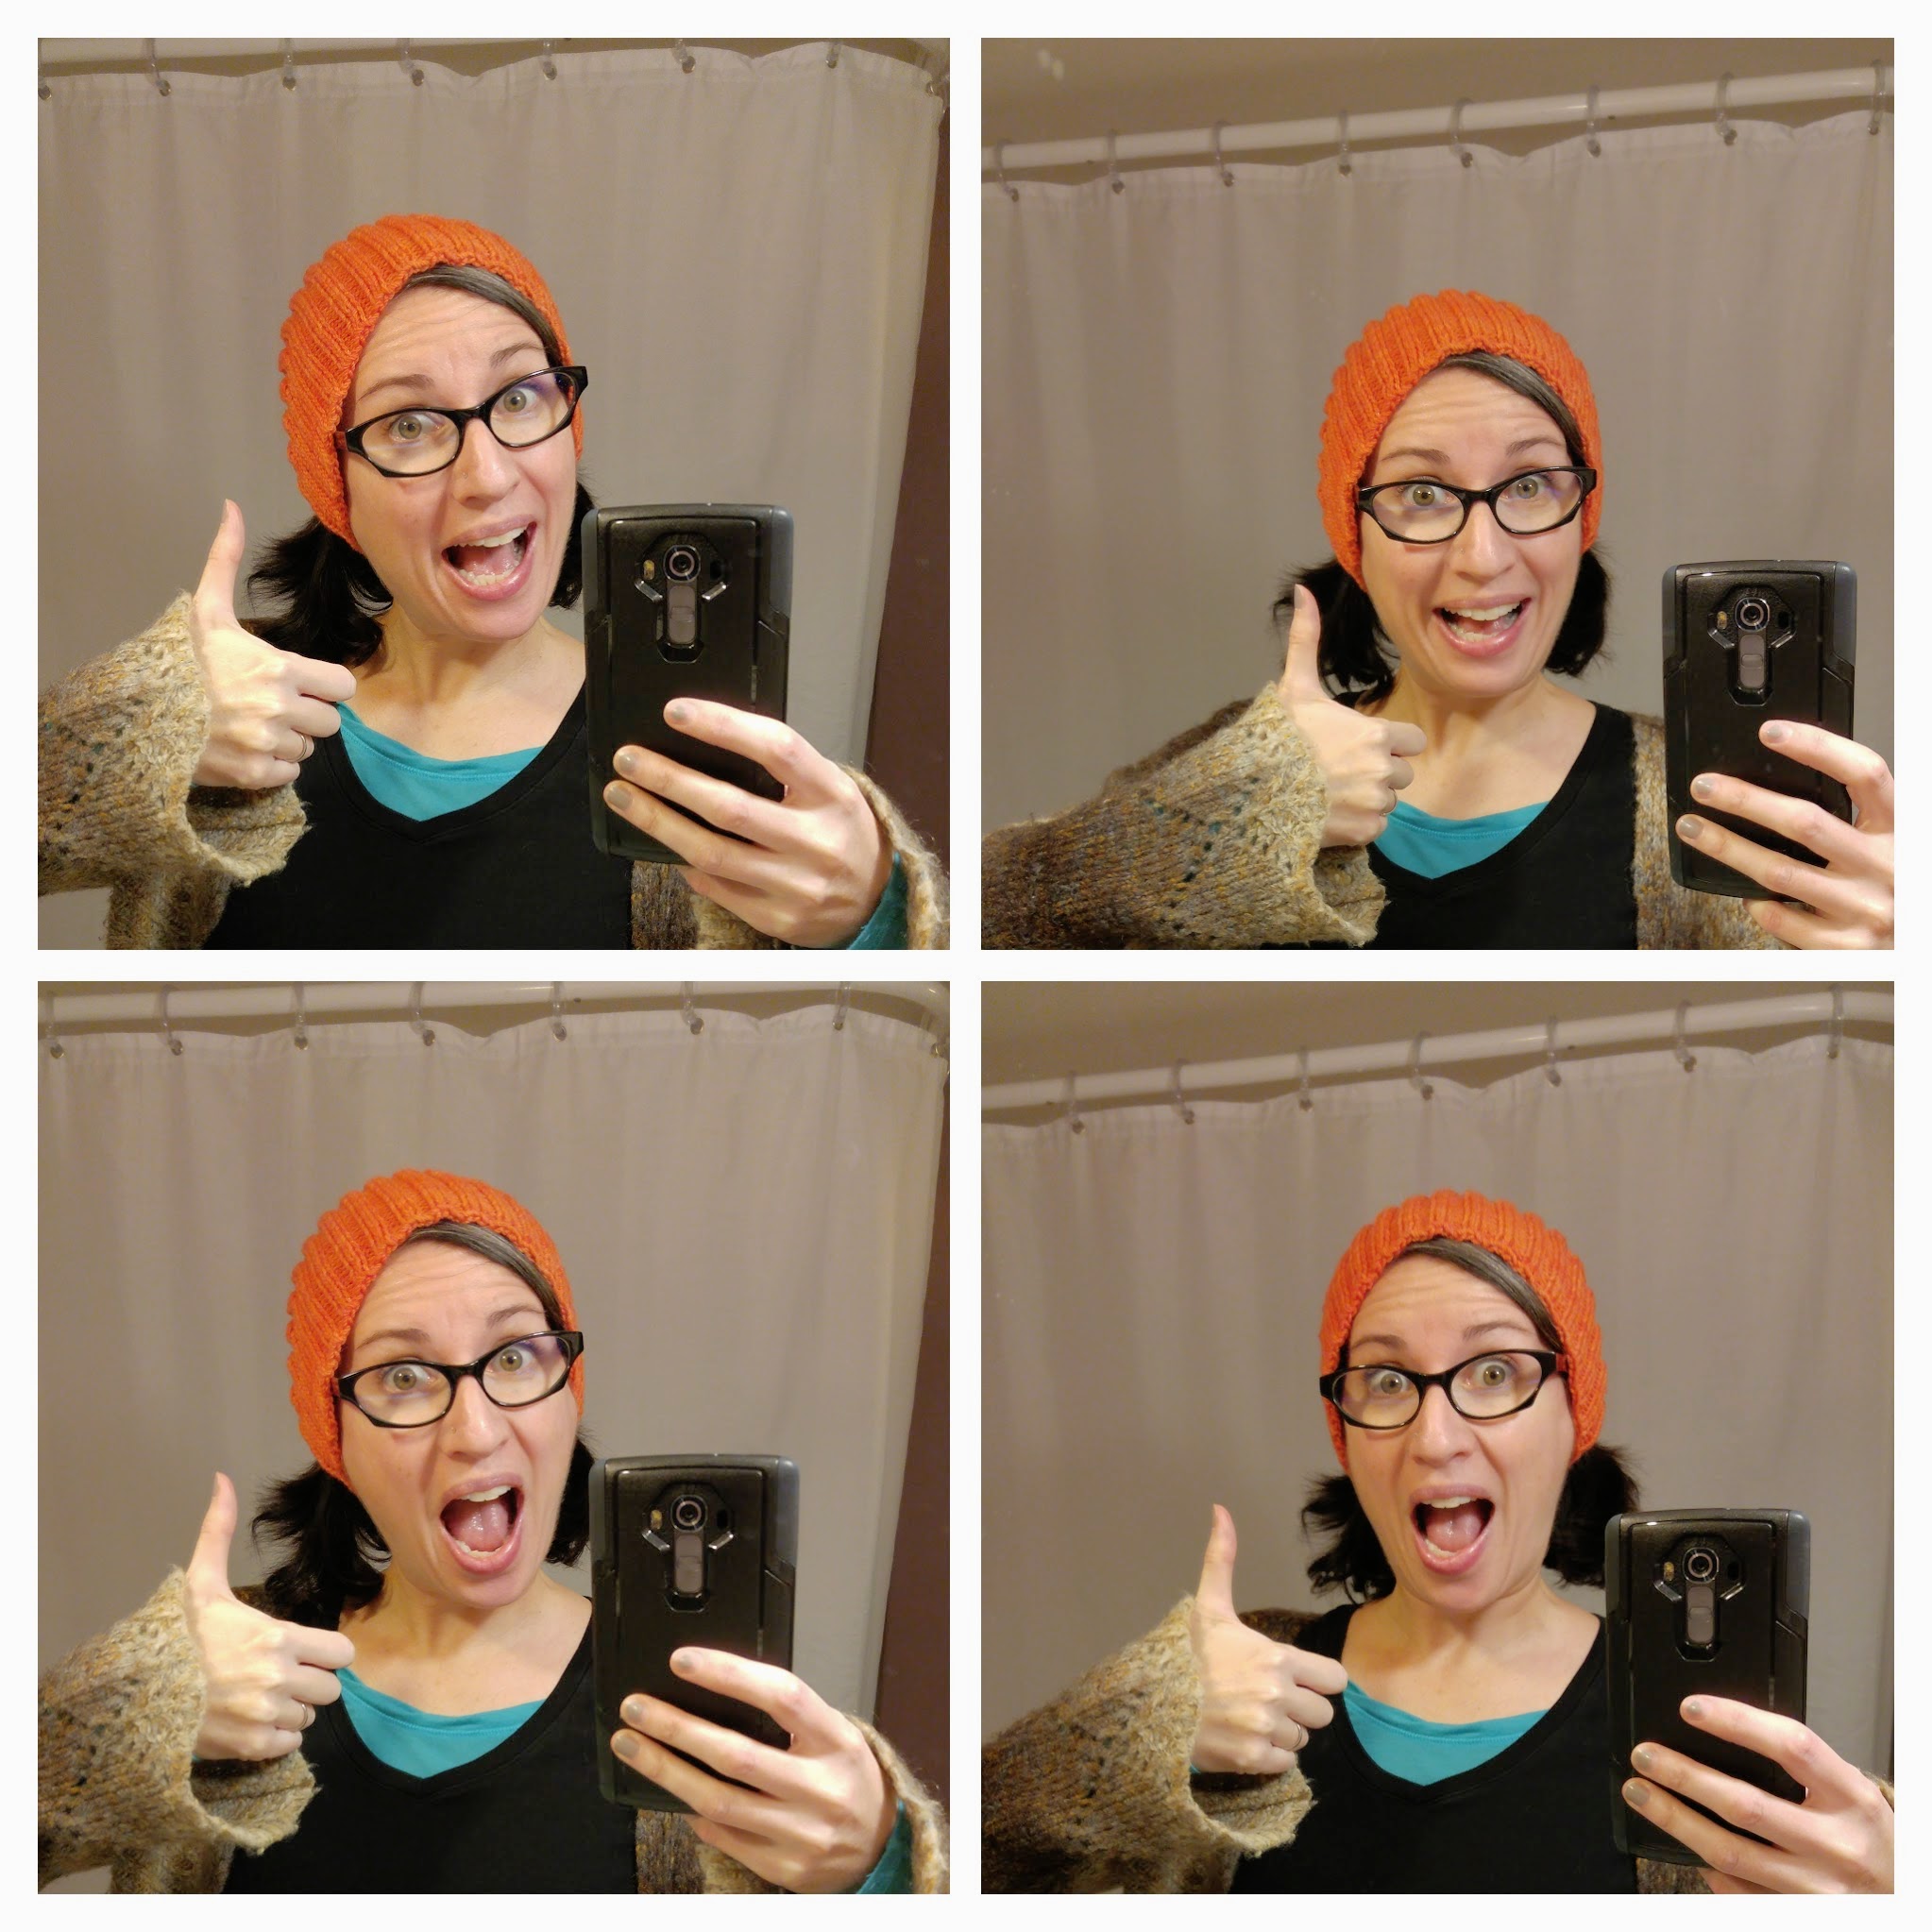 Finished Calorimetry, pattern from Knitty.com. (Selfies are hard, you guys!)